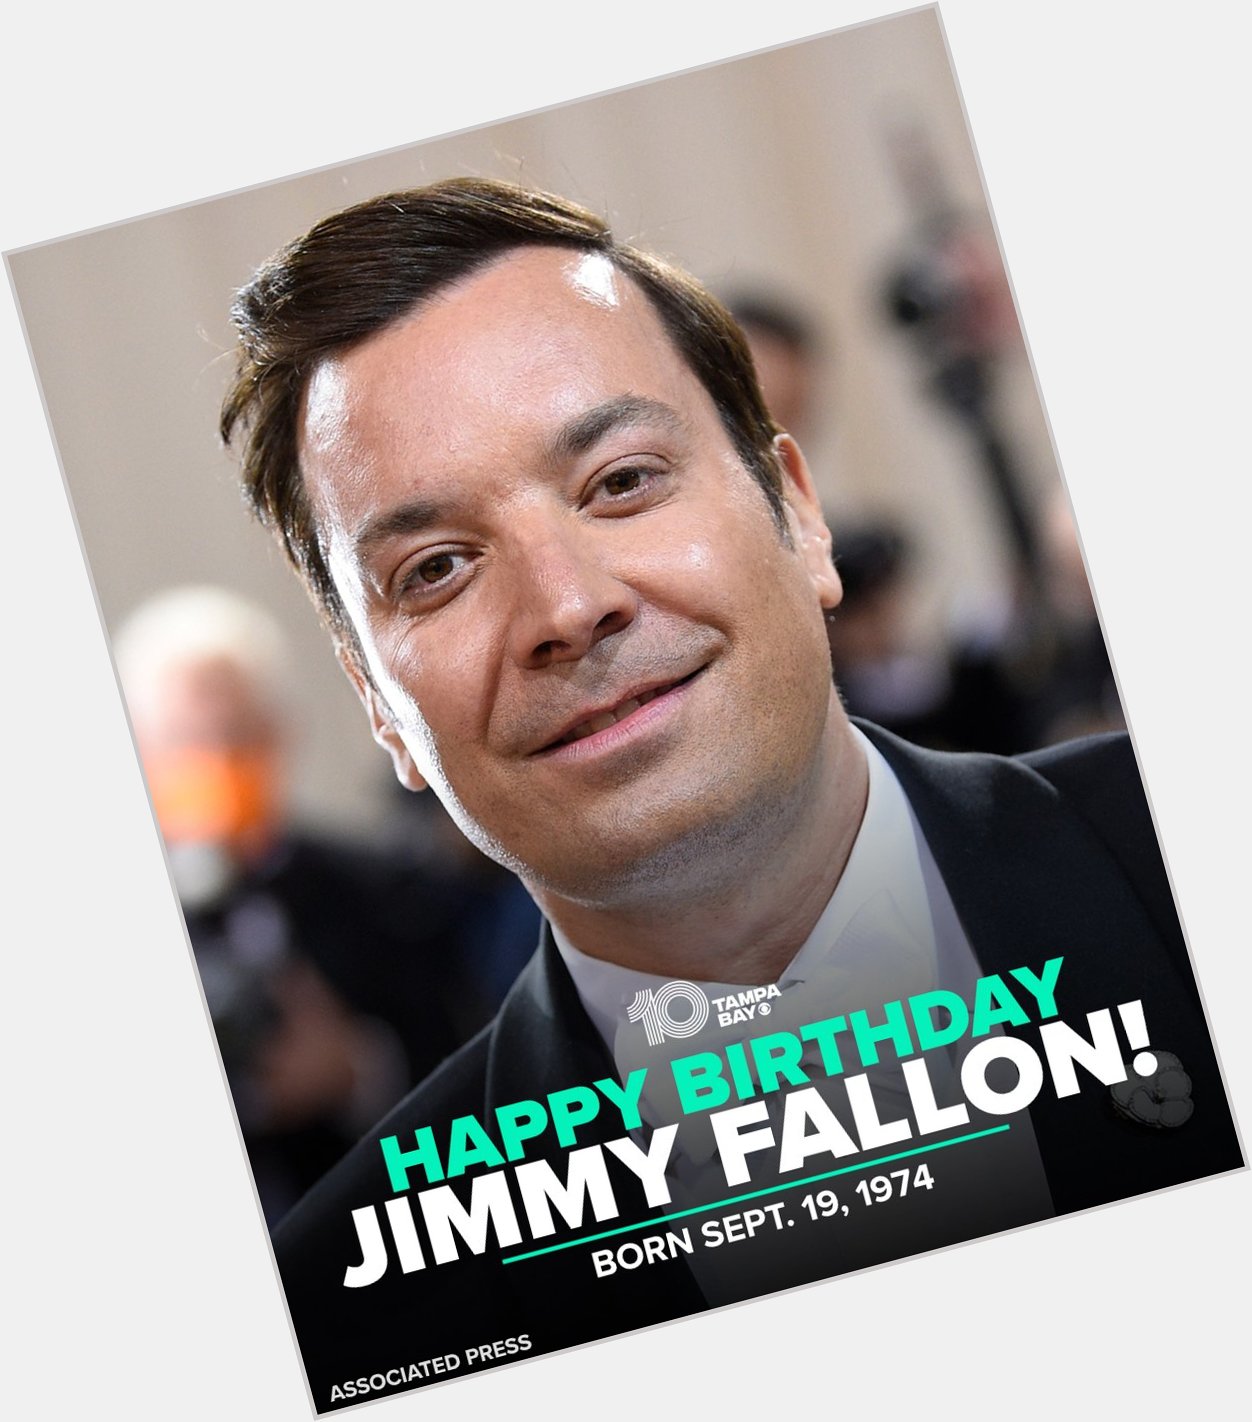 HAPPY BIRTHDAY American television host, comedian, and actor Jimmy Fallon is celebrating his 48th birthday! 